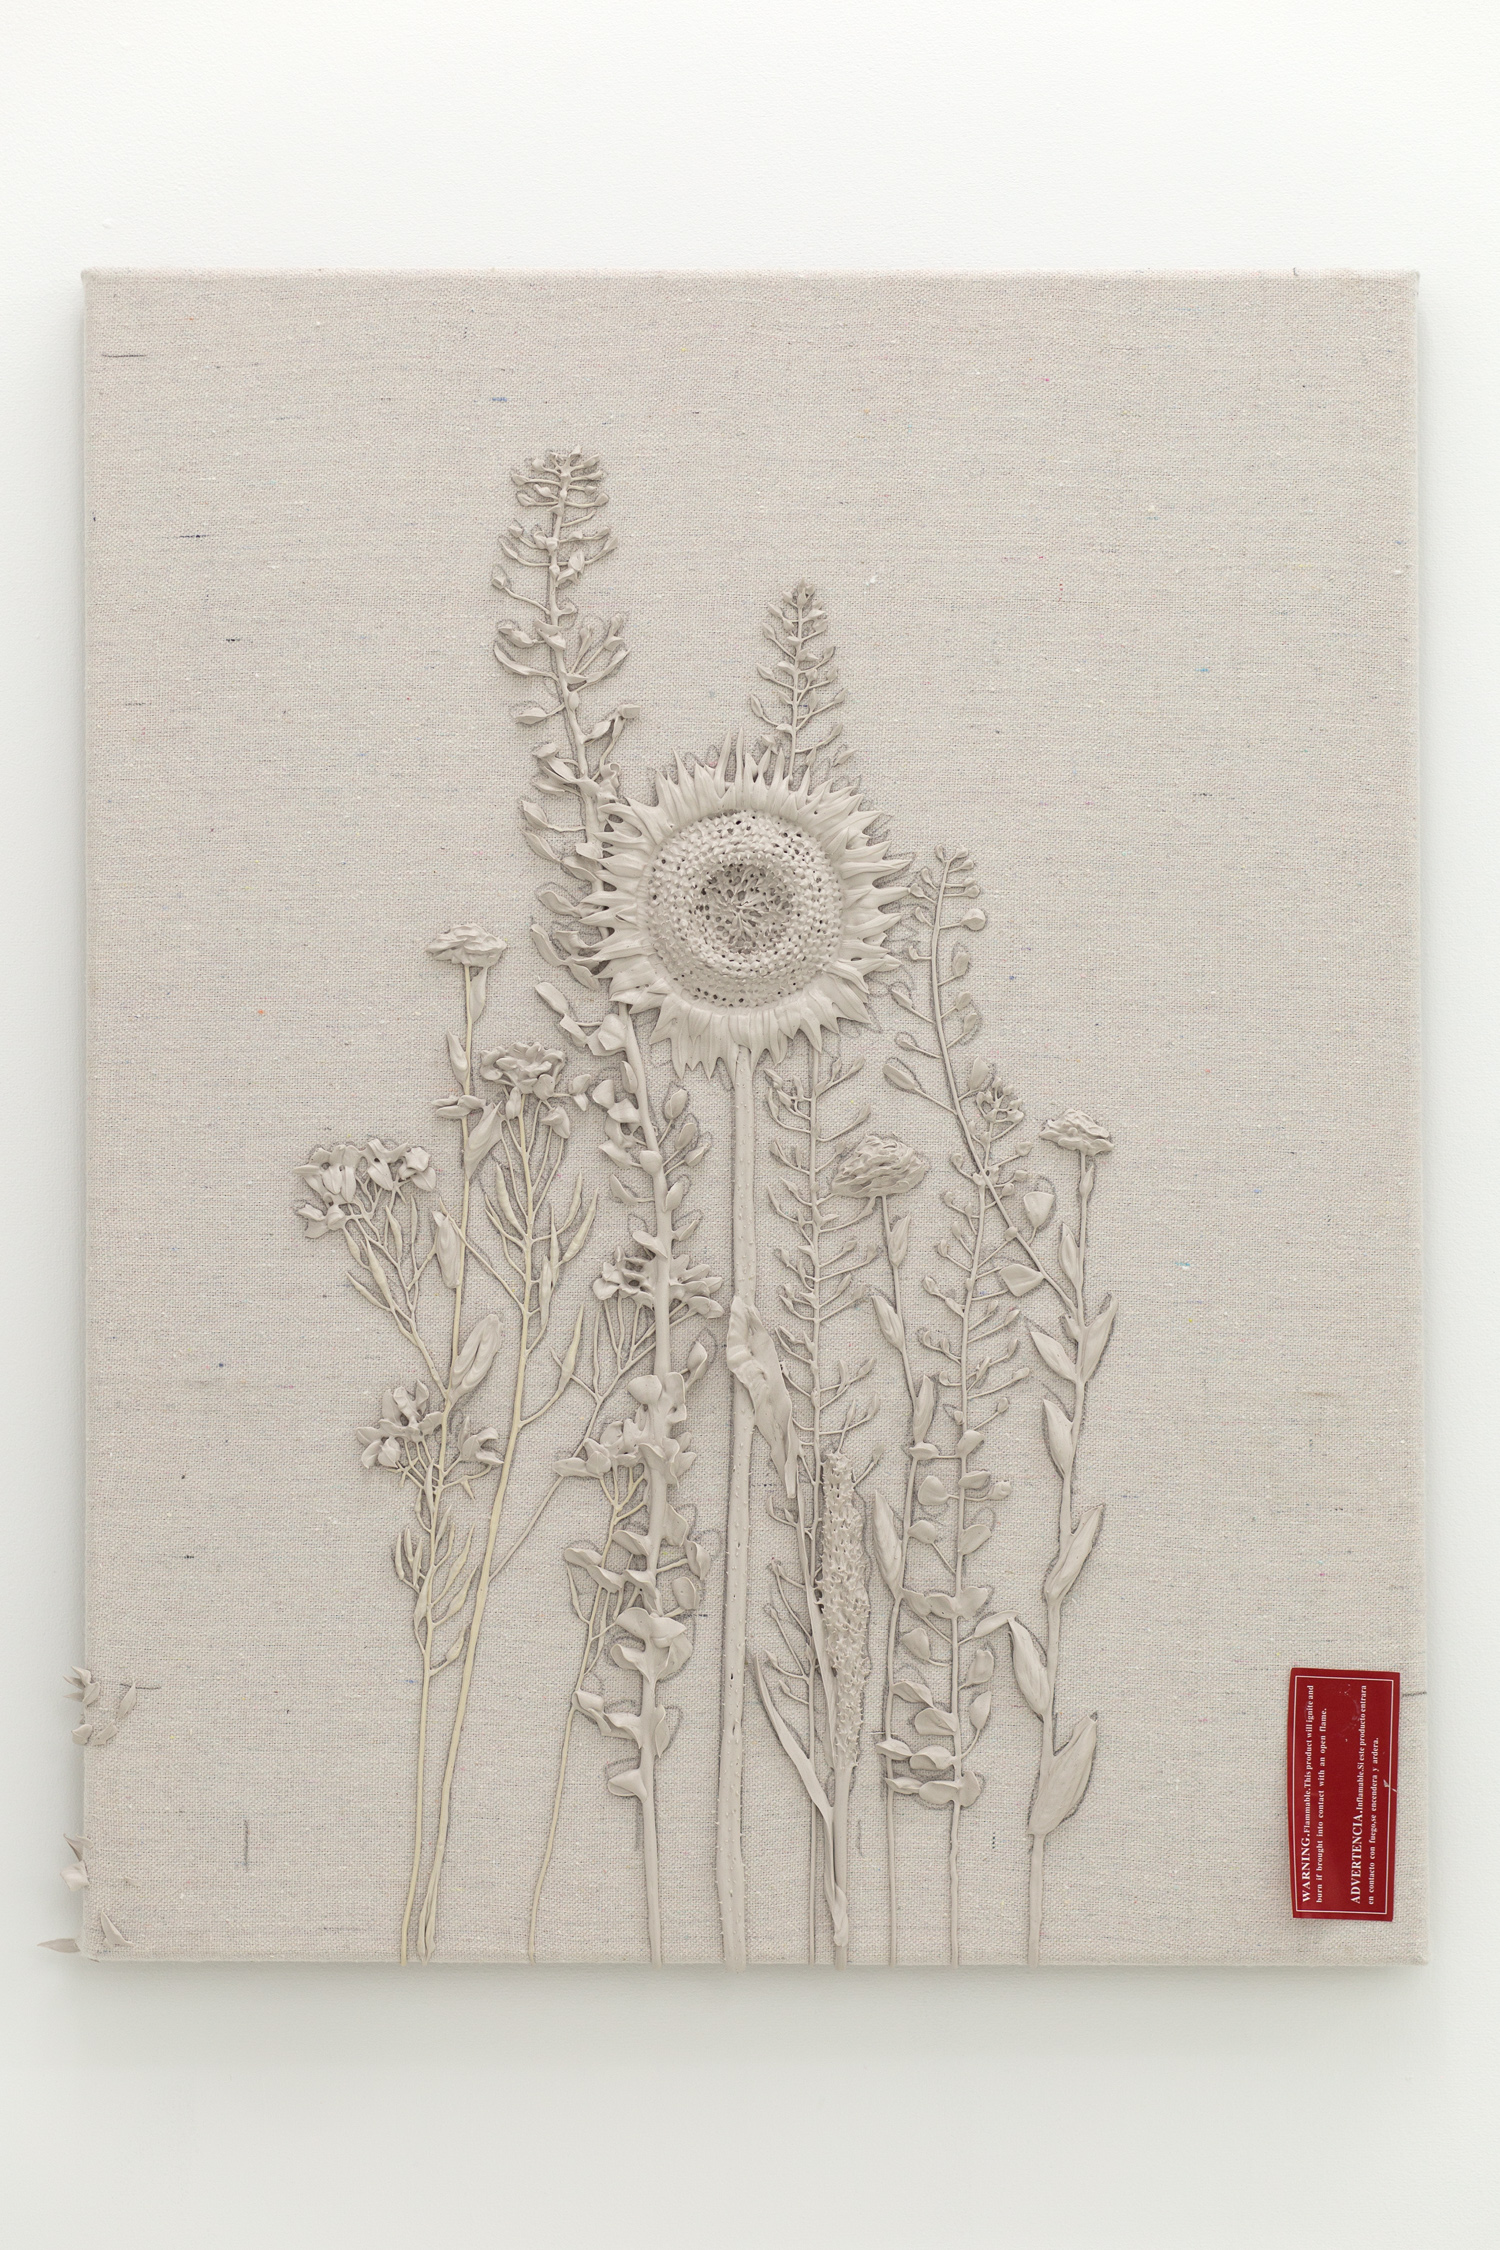 Grey monotone plastic painting of one sunflower and assorted other plants; there is a red sticker in the lower right-hand corner